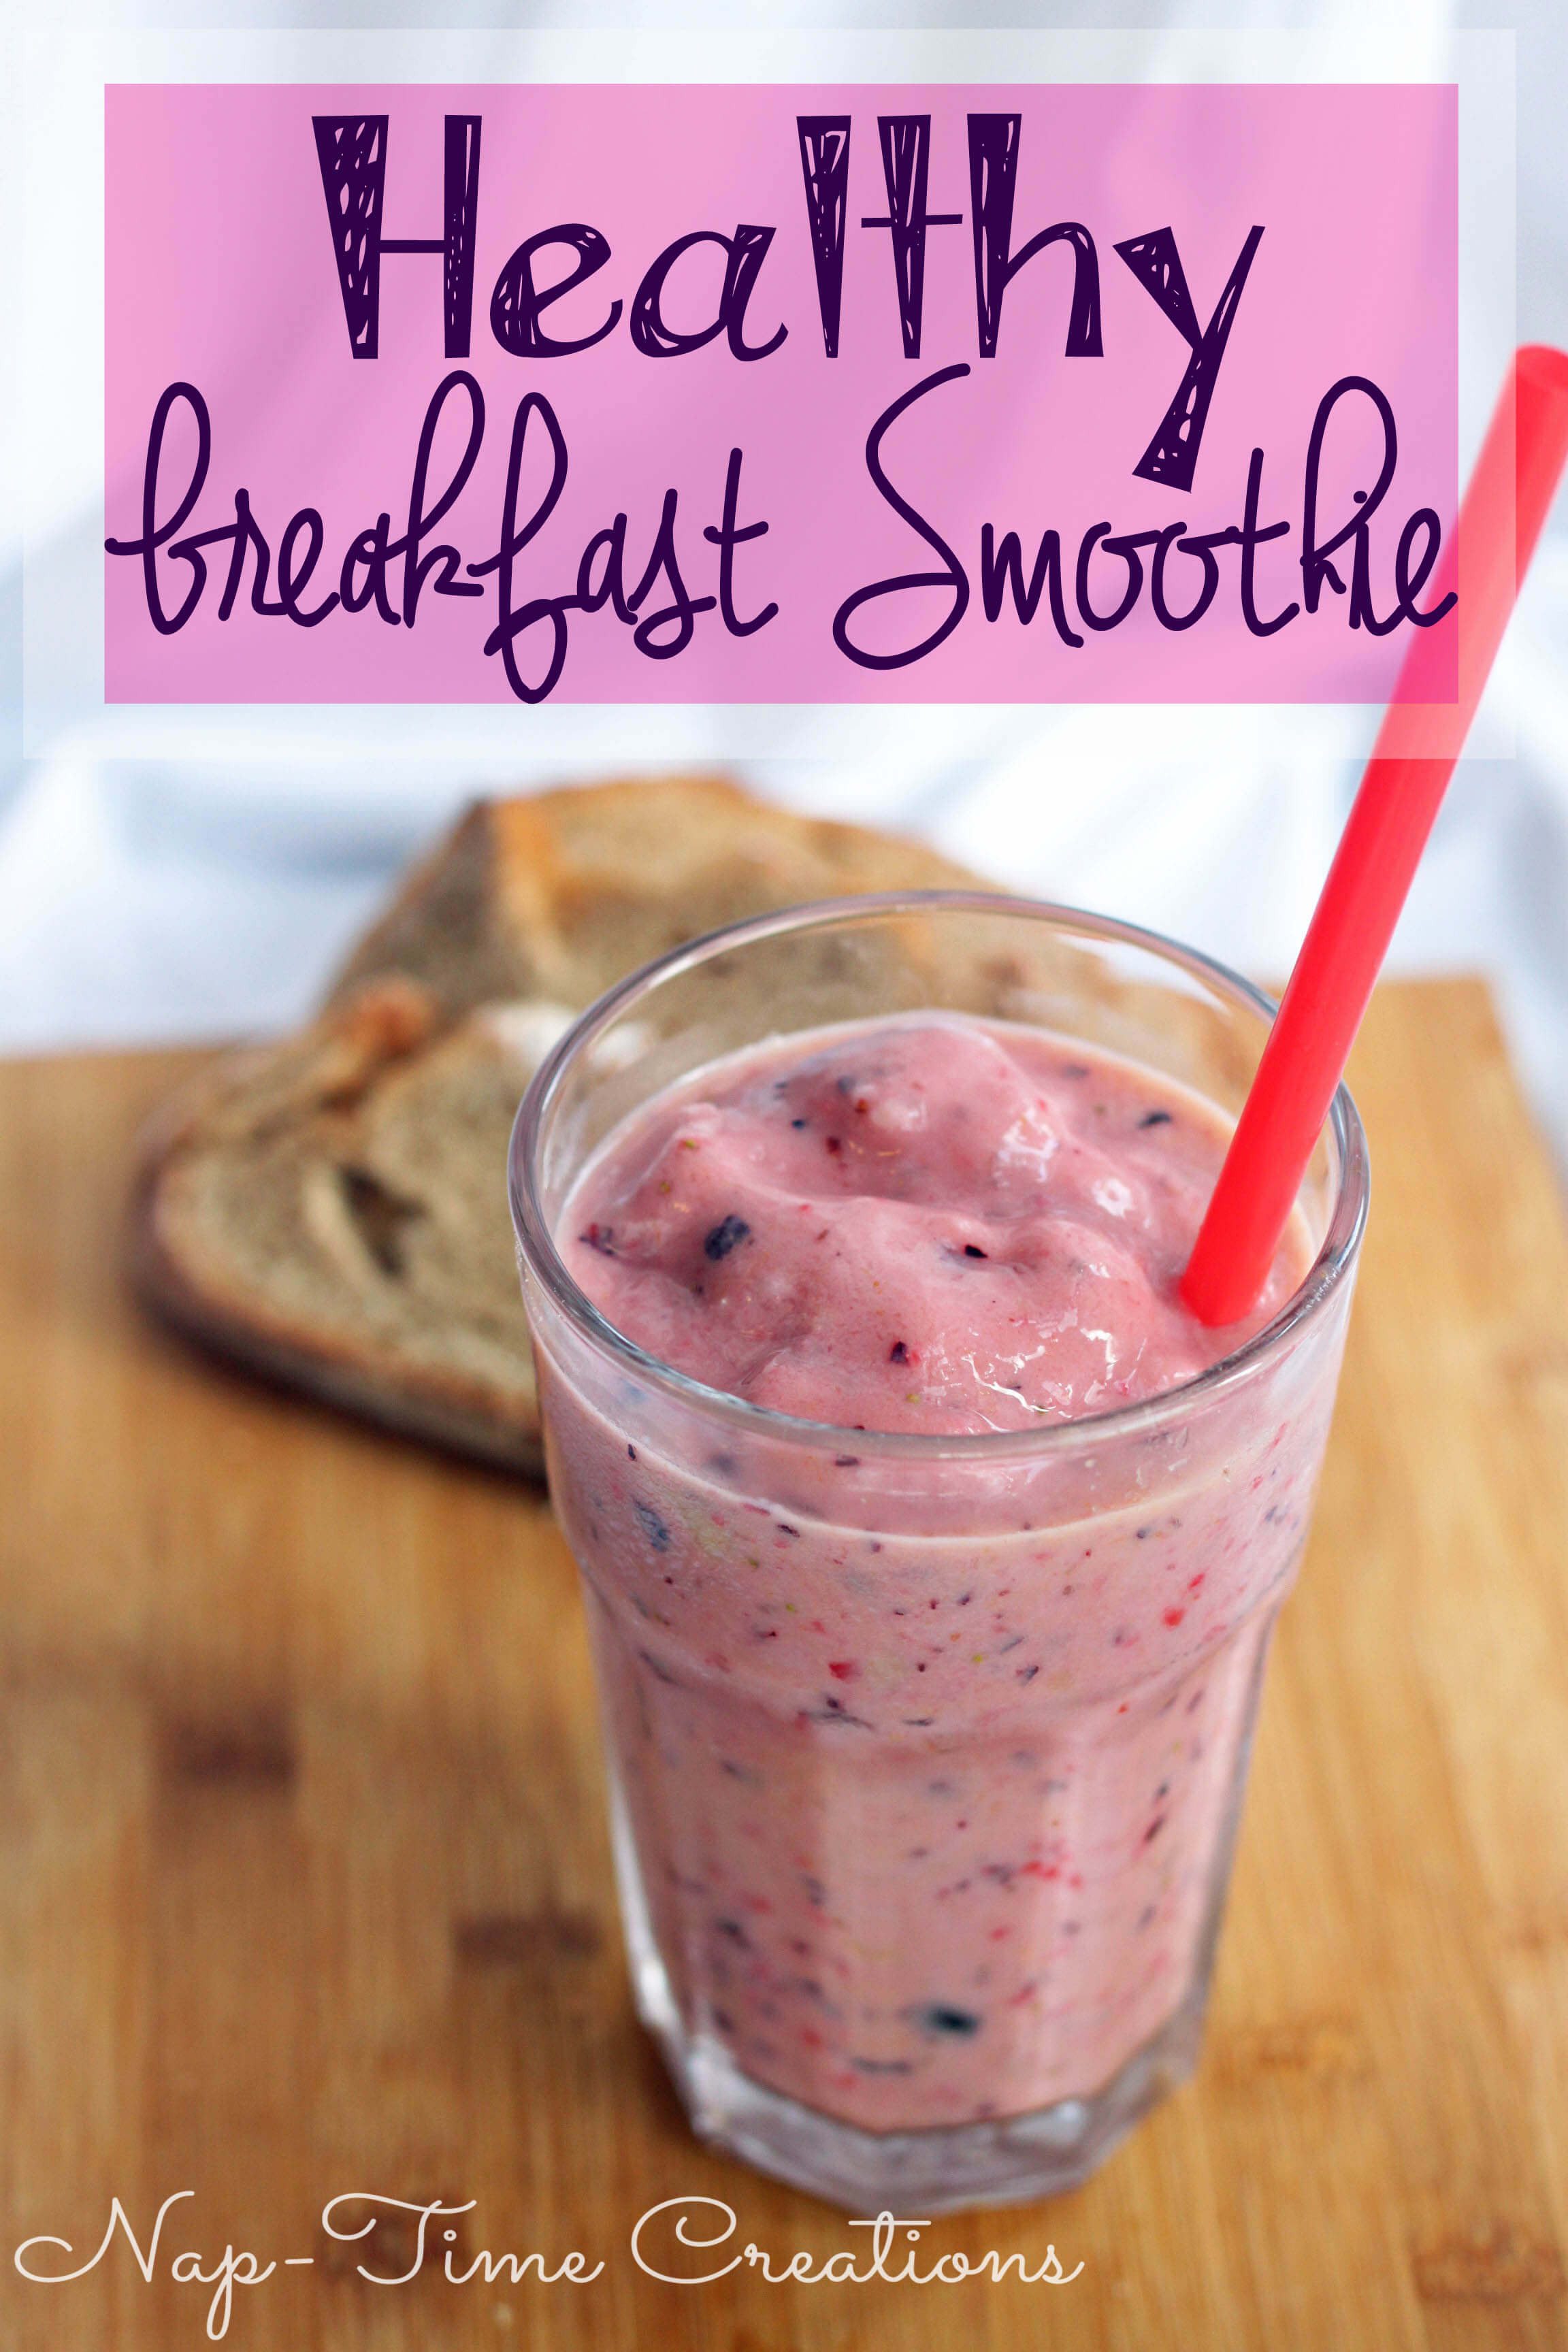 Breakfast Healthy Smoothies
 Healthy Breakfast Smoothie Recipe Nap time Creations